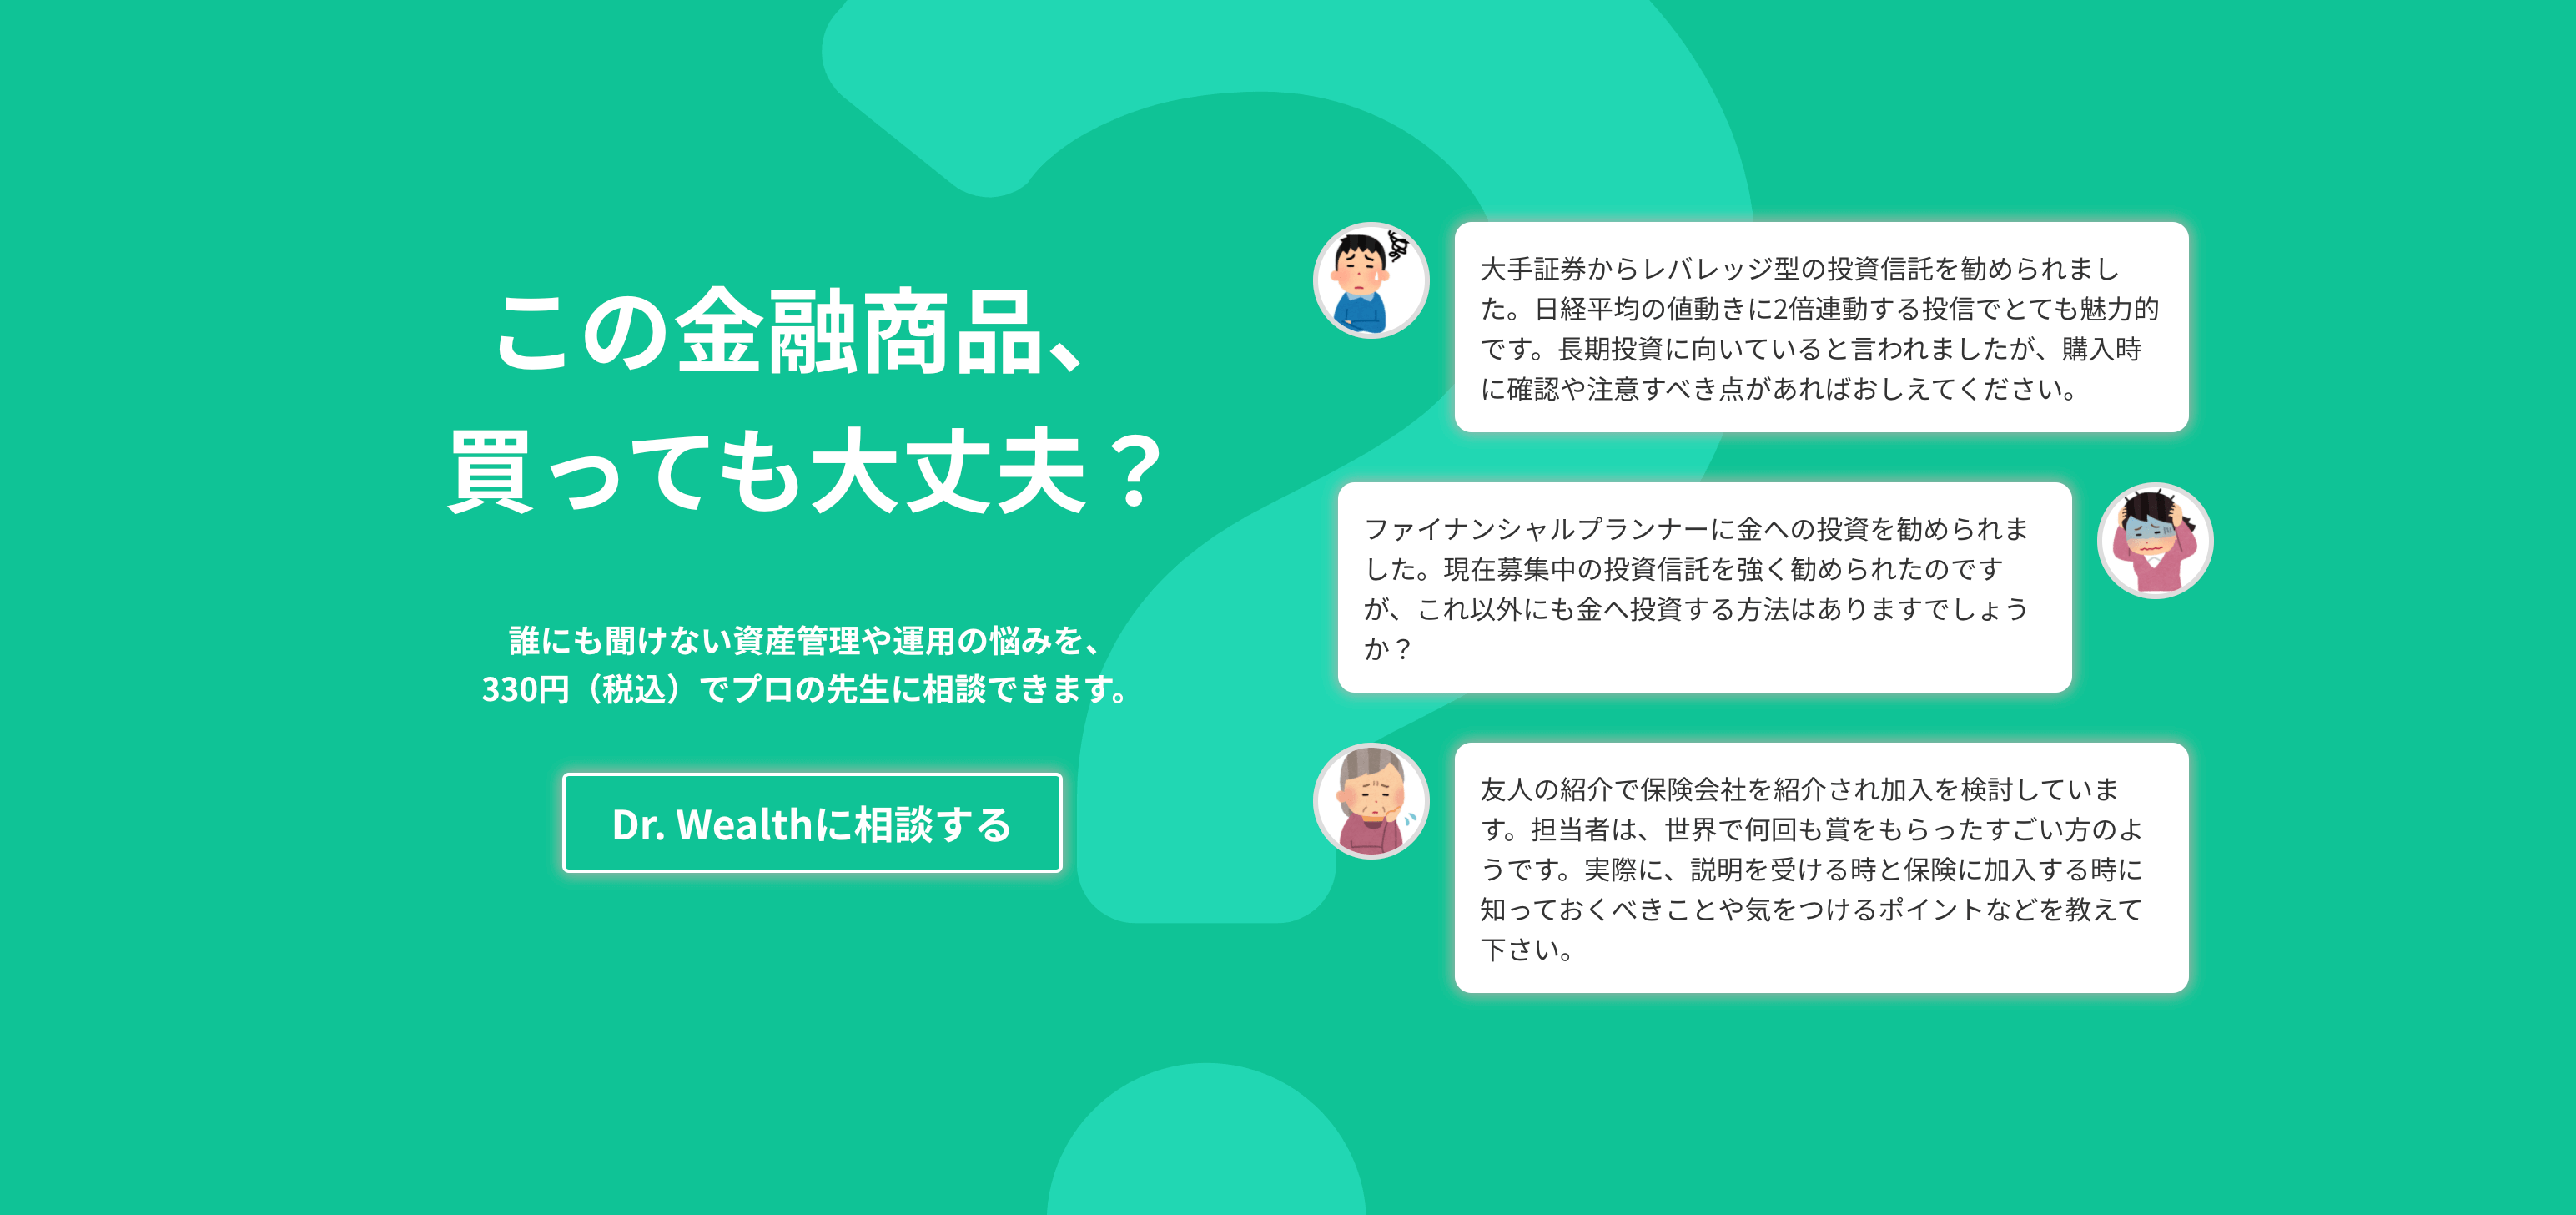 Dr. Wealth｜資産管理や資産管理の悩みをプロの先生に相談